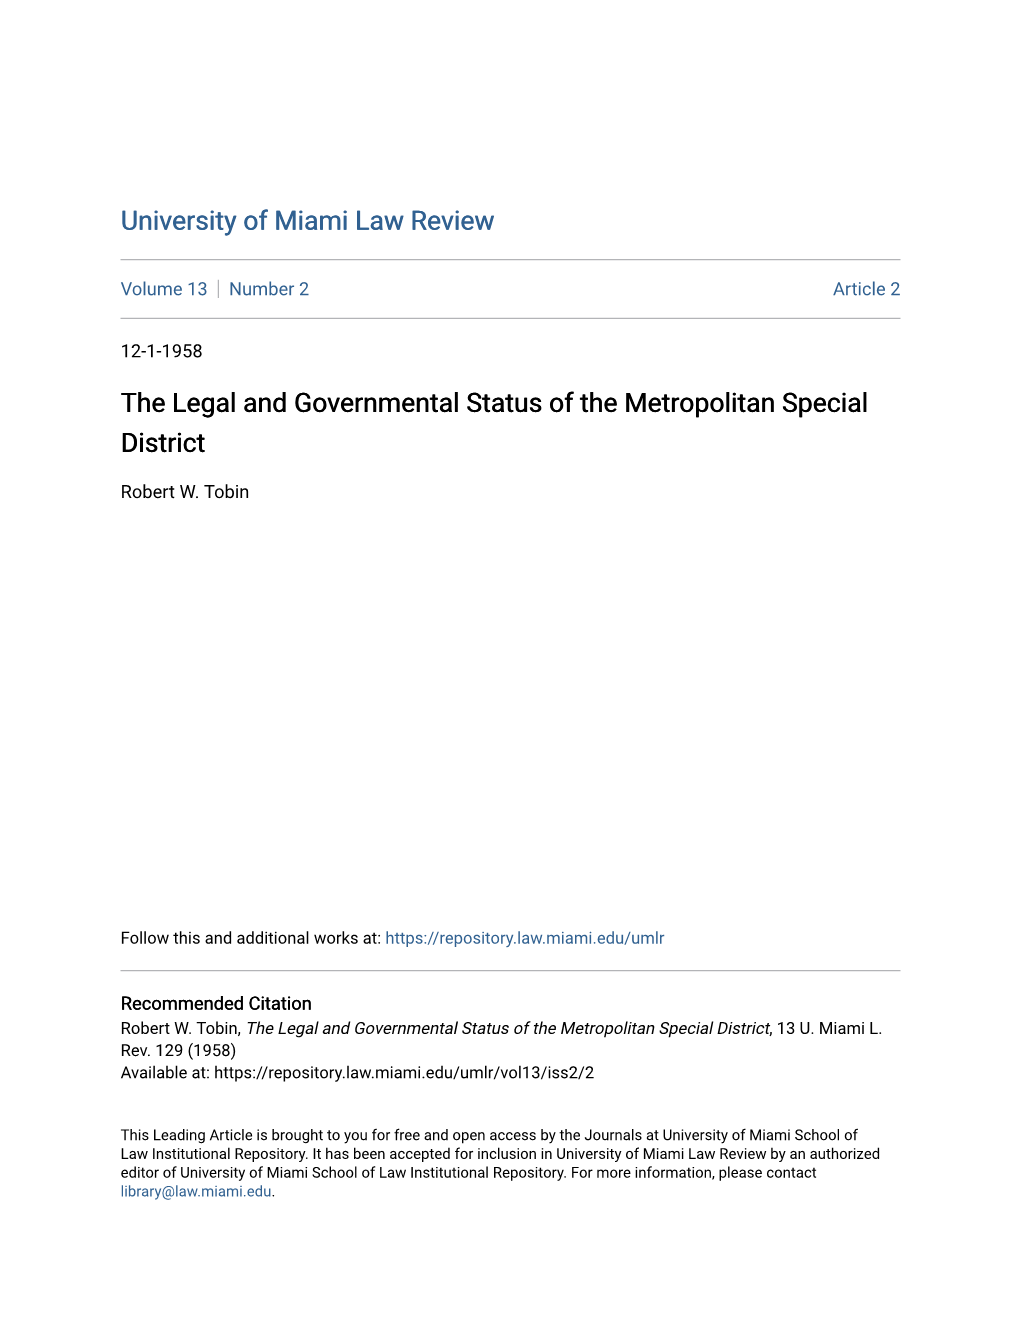 The Legal and Governmental Status of the Metropolitan Special District